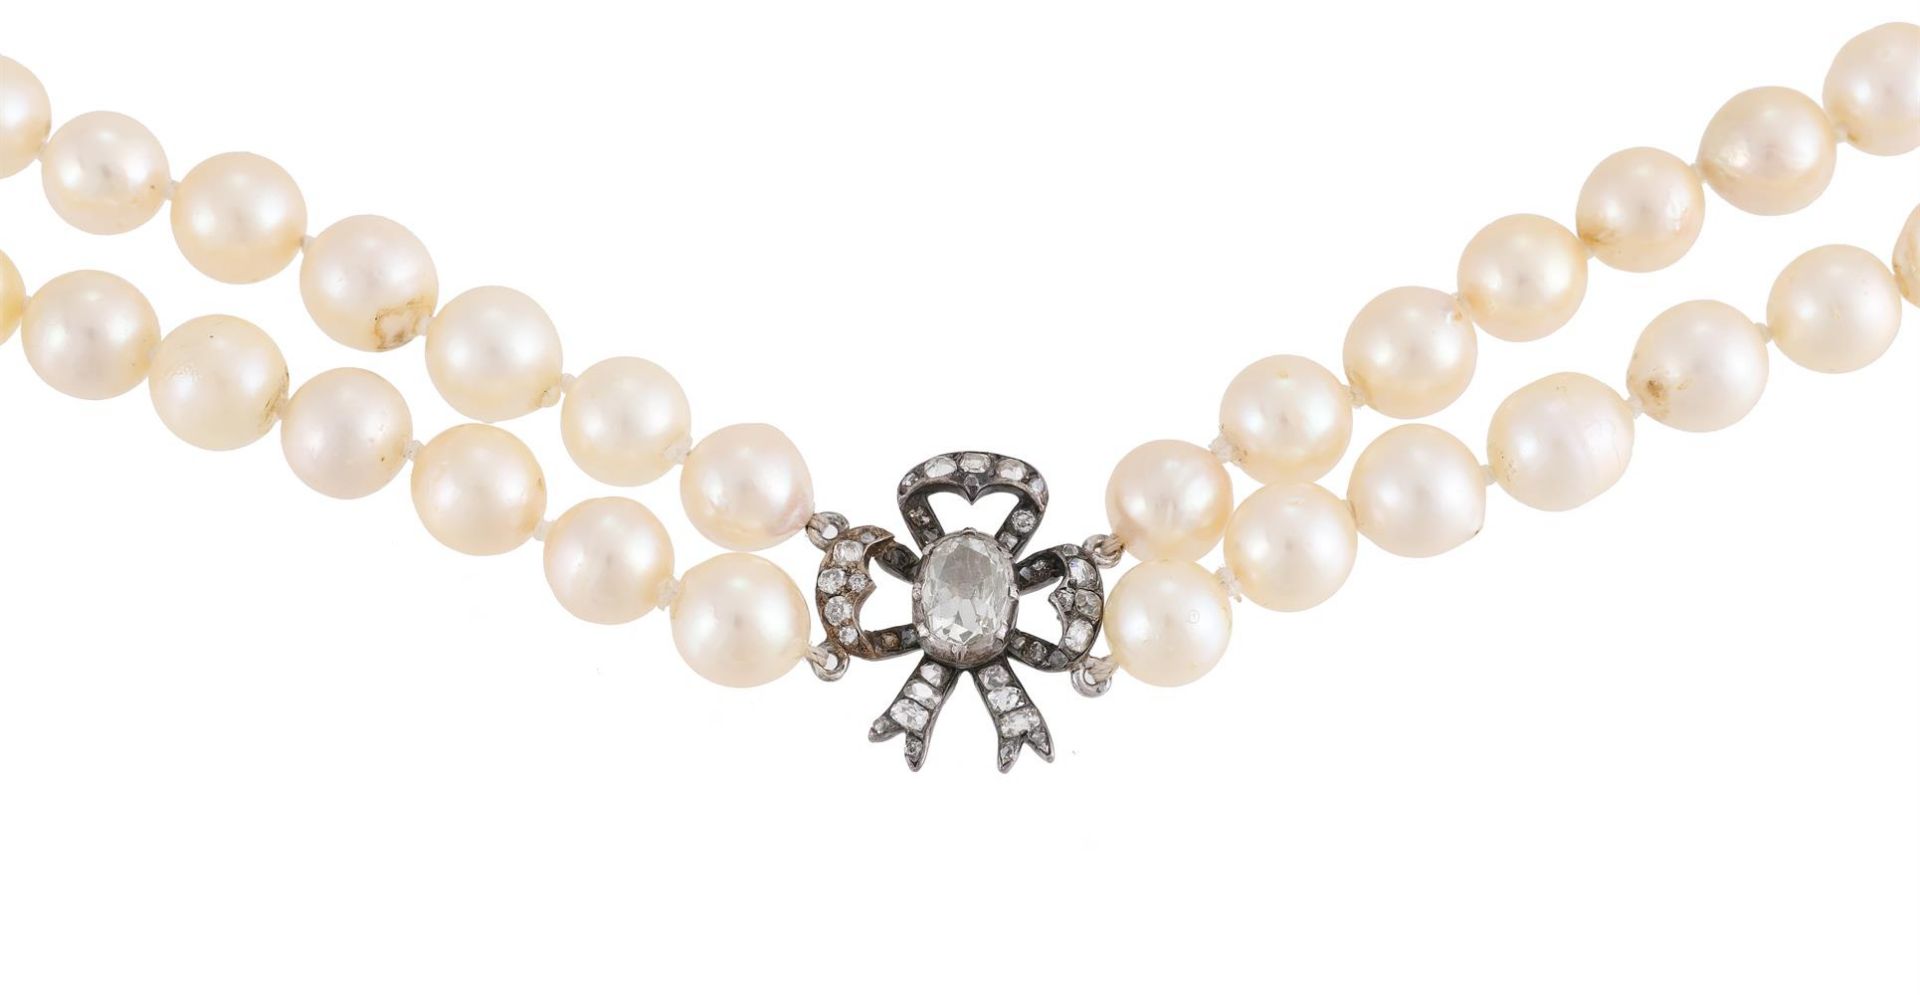 A TWO ROW CULTURED PEARL NECKLACE TO A DIAMOND BOW PANEL - Image 2 of 2